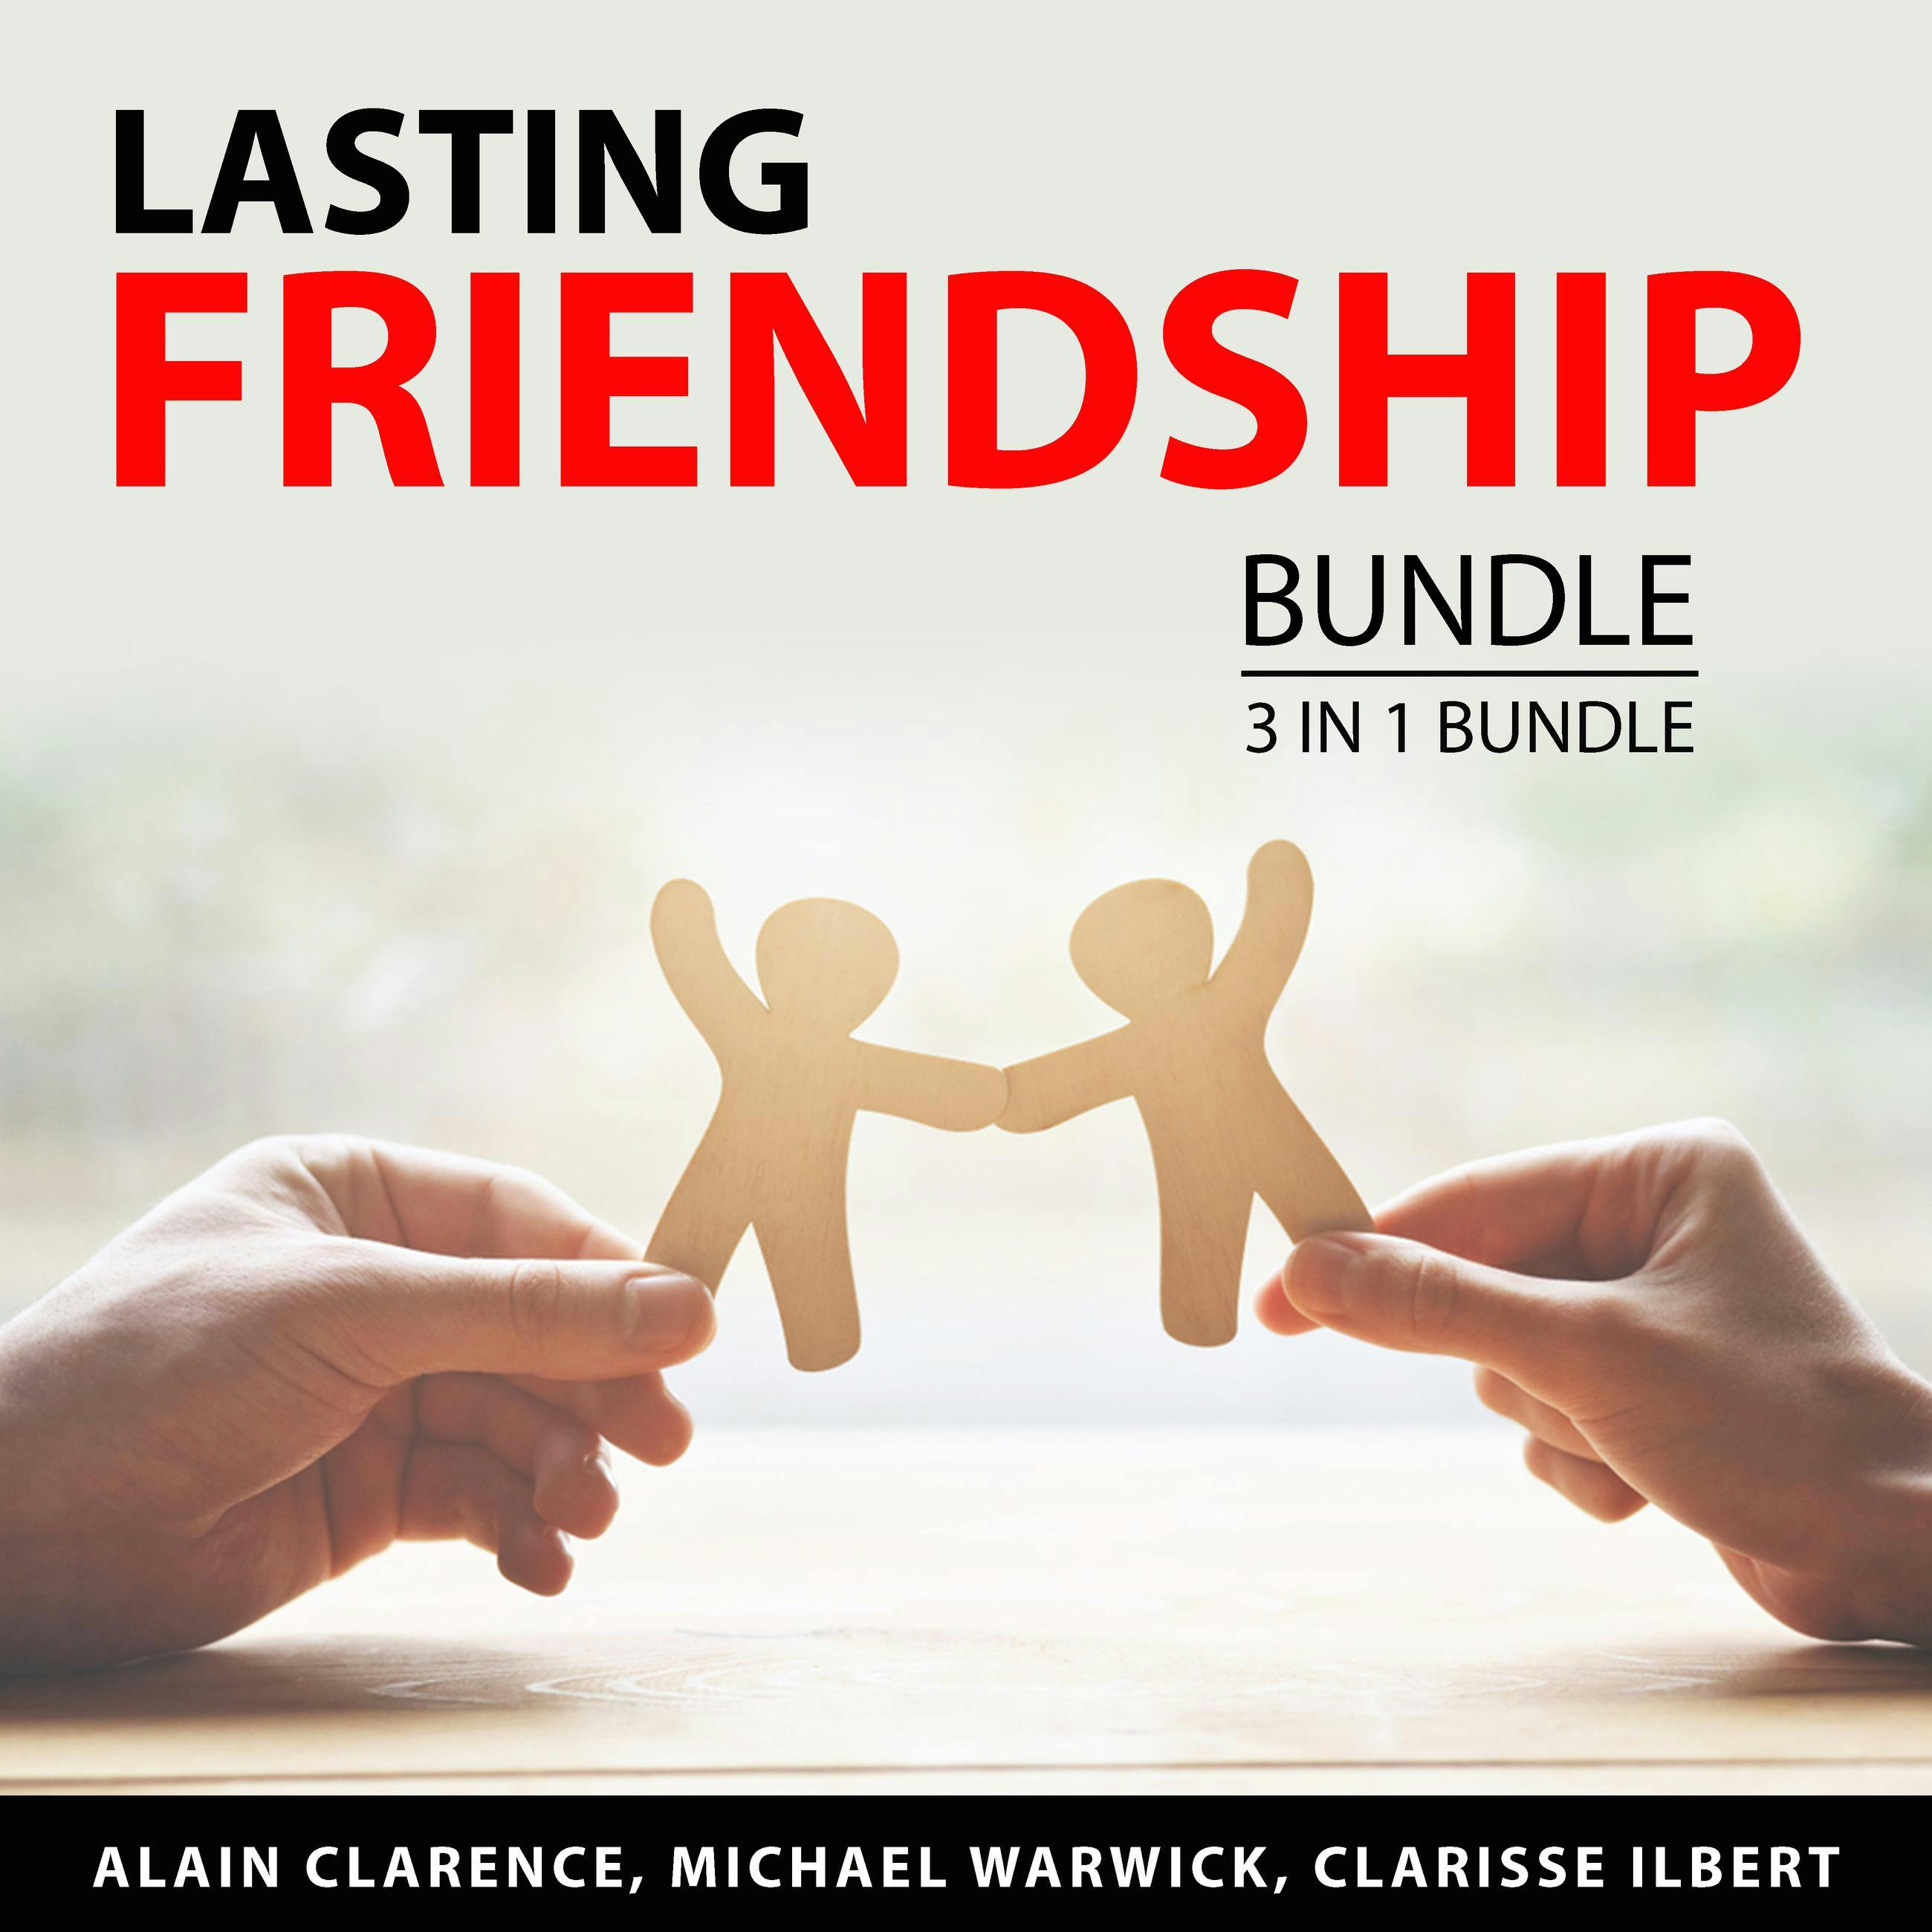 Lasting Friendship Bundle, 3 in 1 Bundle: Long Lasting Friendships, The Art of Making Friends, and Improve Your Social Skills and Influence Others - Clarisse Ilbert, Alain Clarence, Michael Warwick